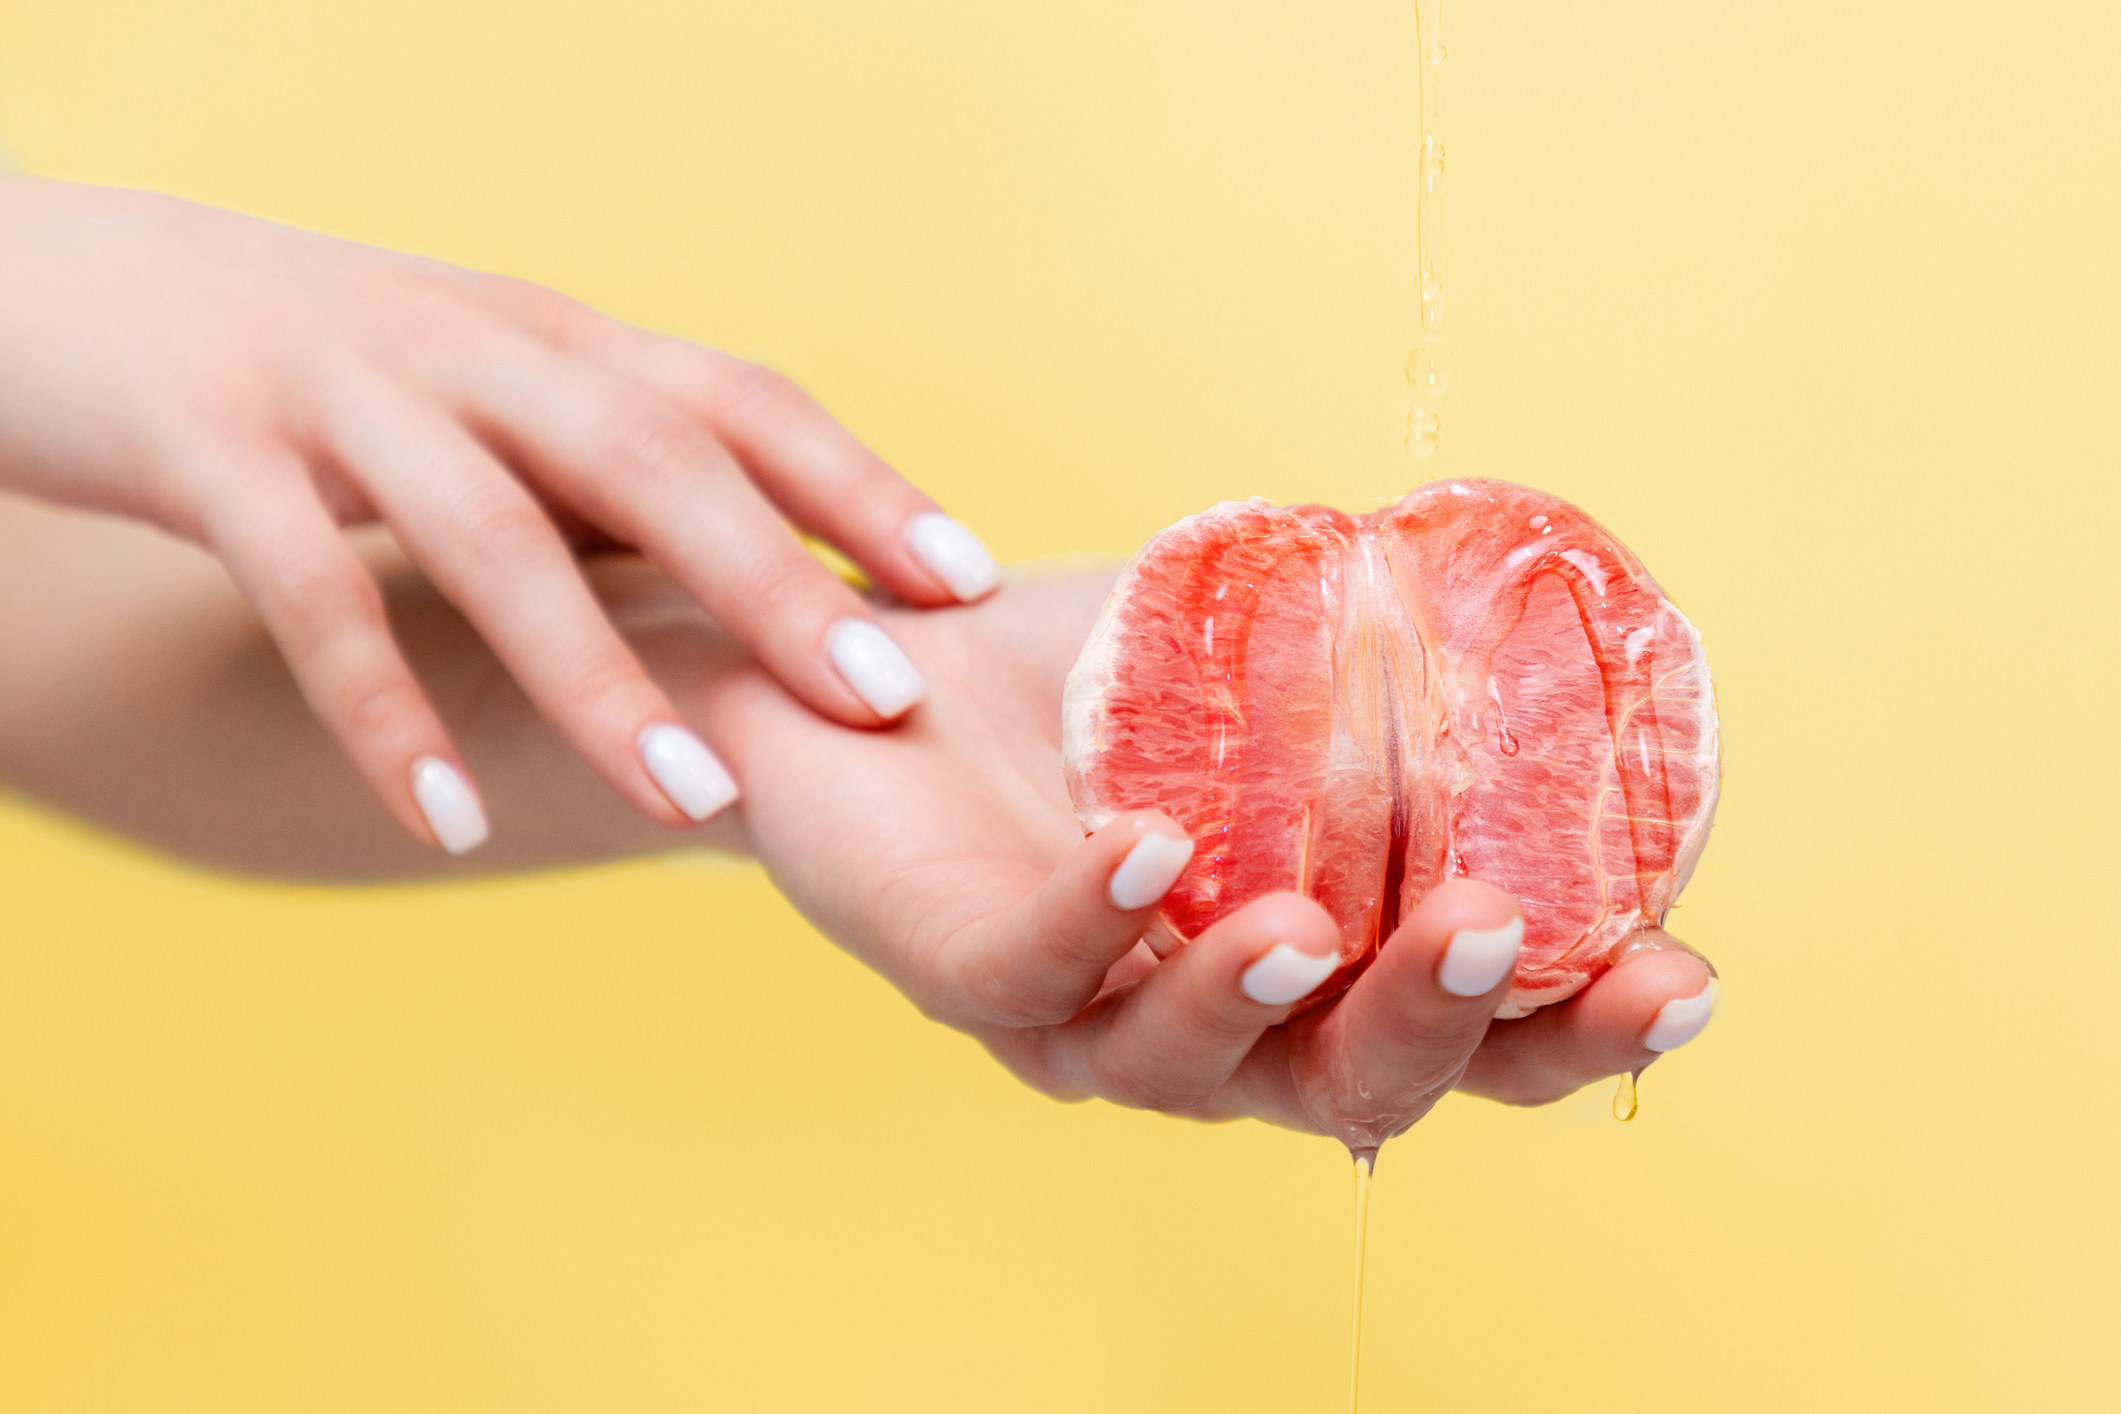 A person holding a peeled cut grapefruit